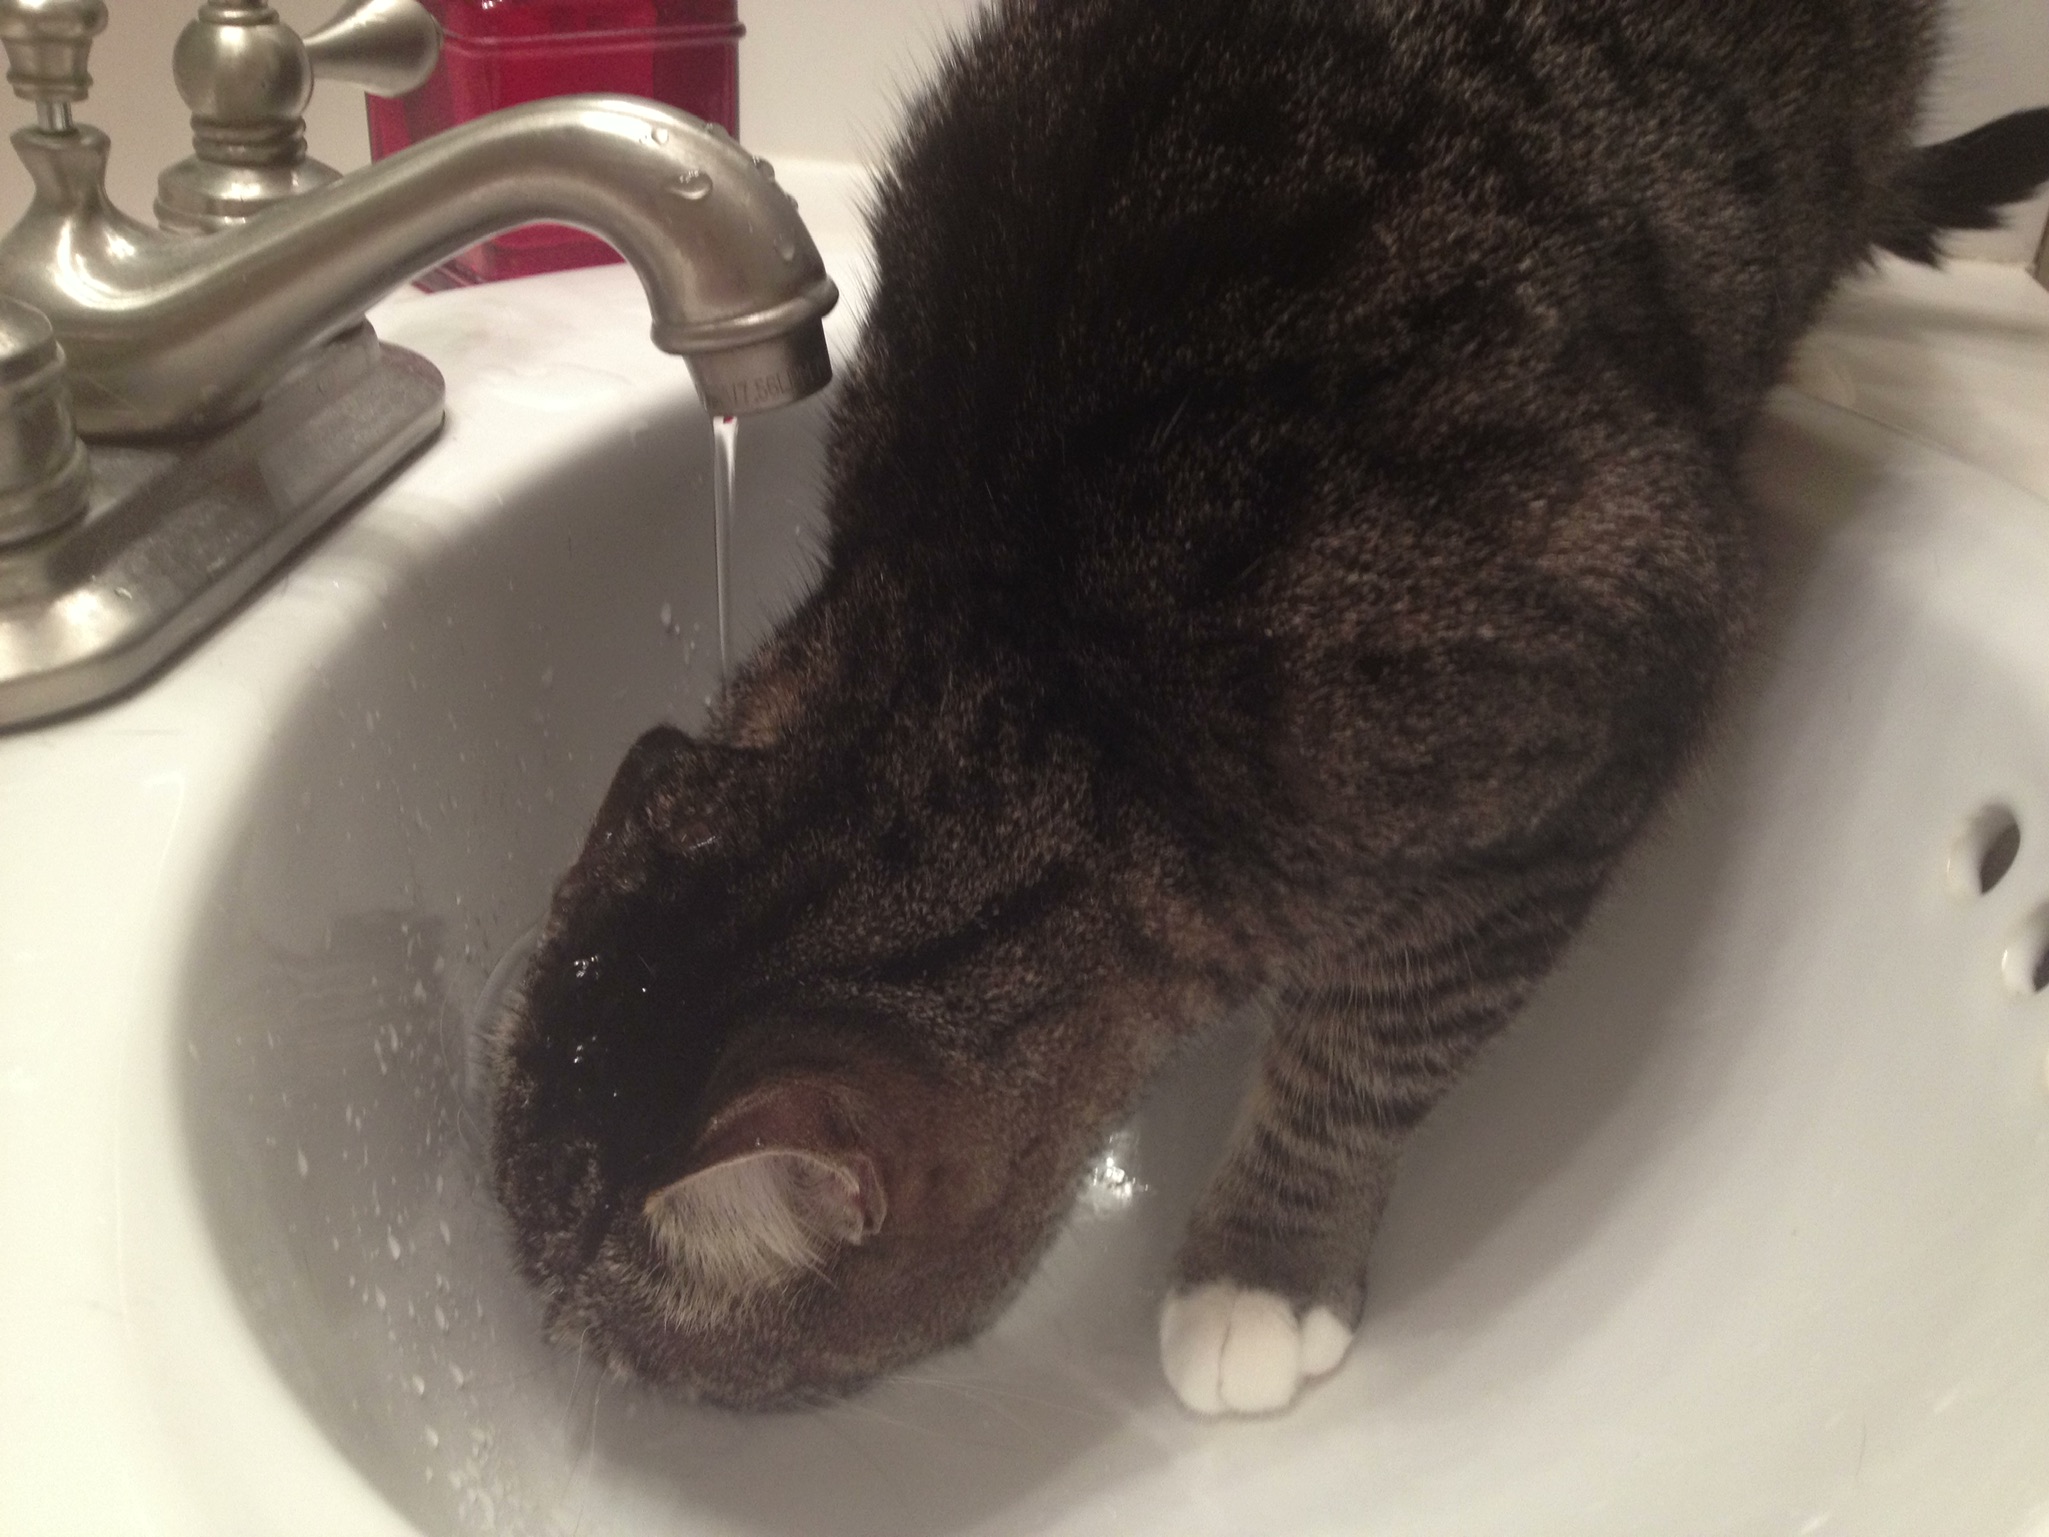 Haku drinking from the sink